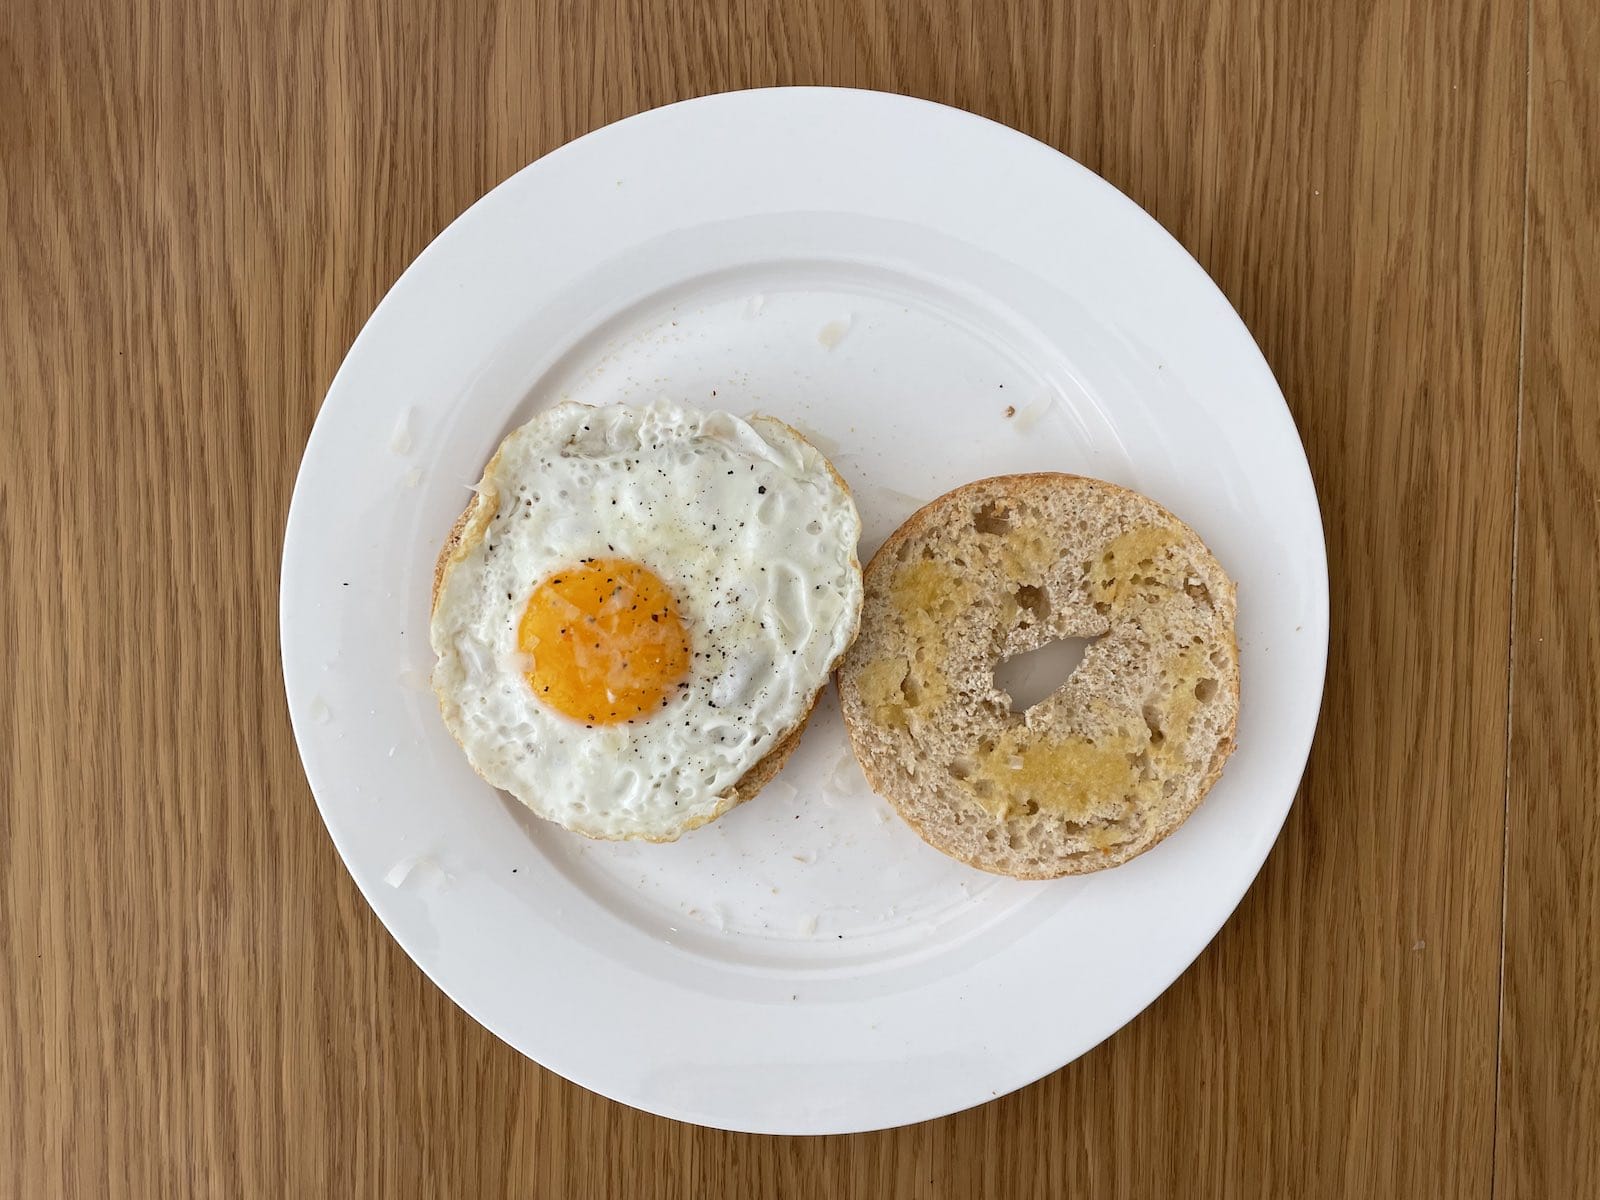 An open bagel served with a fried egg on top of one half, sitting on a white plate on a wooden table